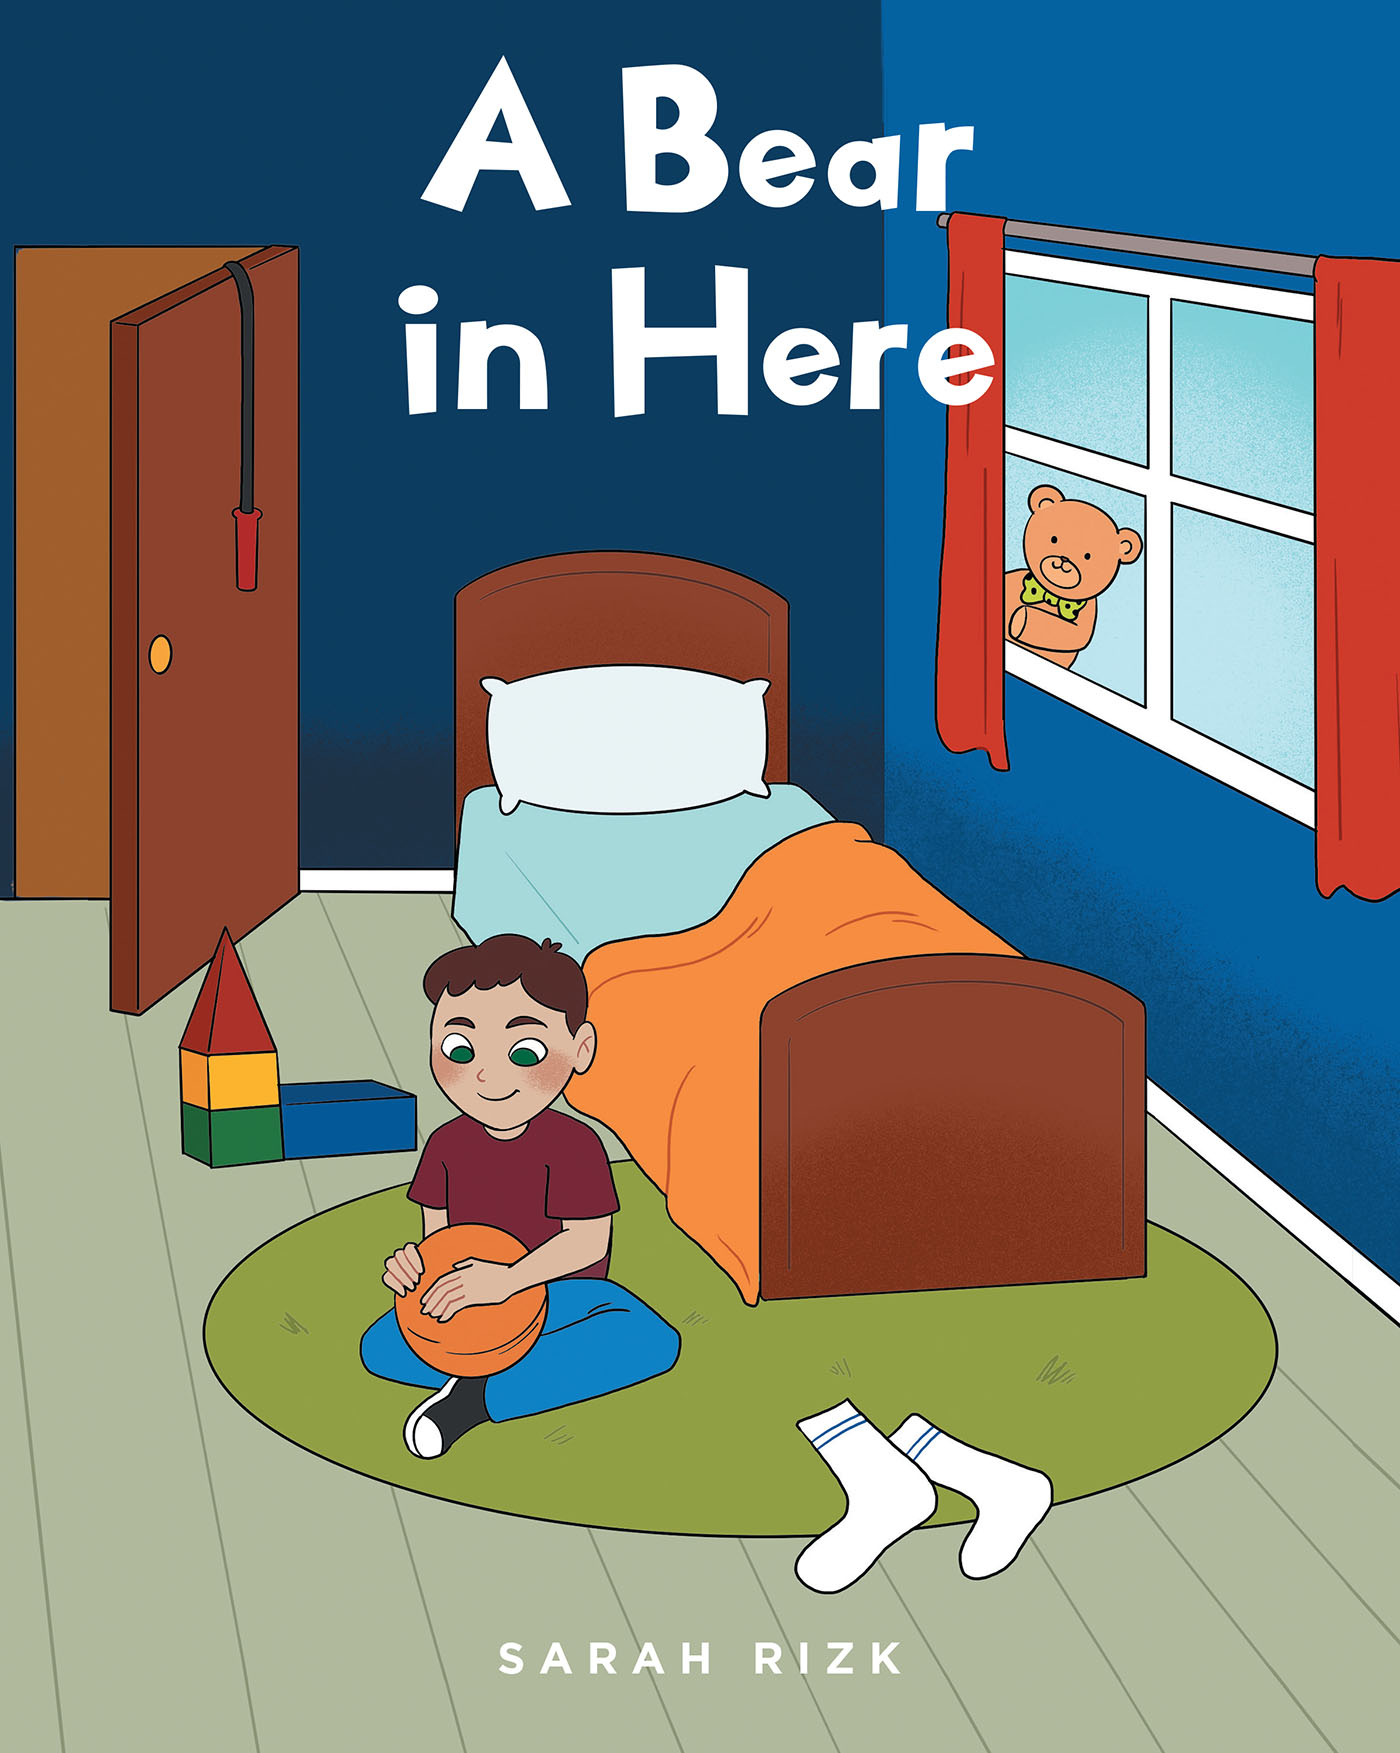 Sarah Rizk’s New Book, "A Bear in Here," is a Delightful Story of a Young Boy Who Makes a New Friend After Cleaning His Room and Putting Away His Toys